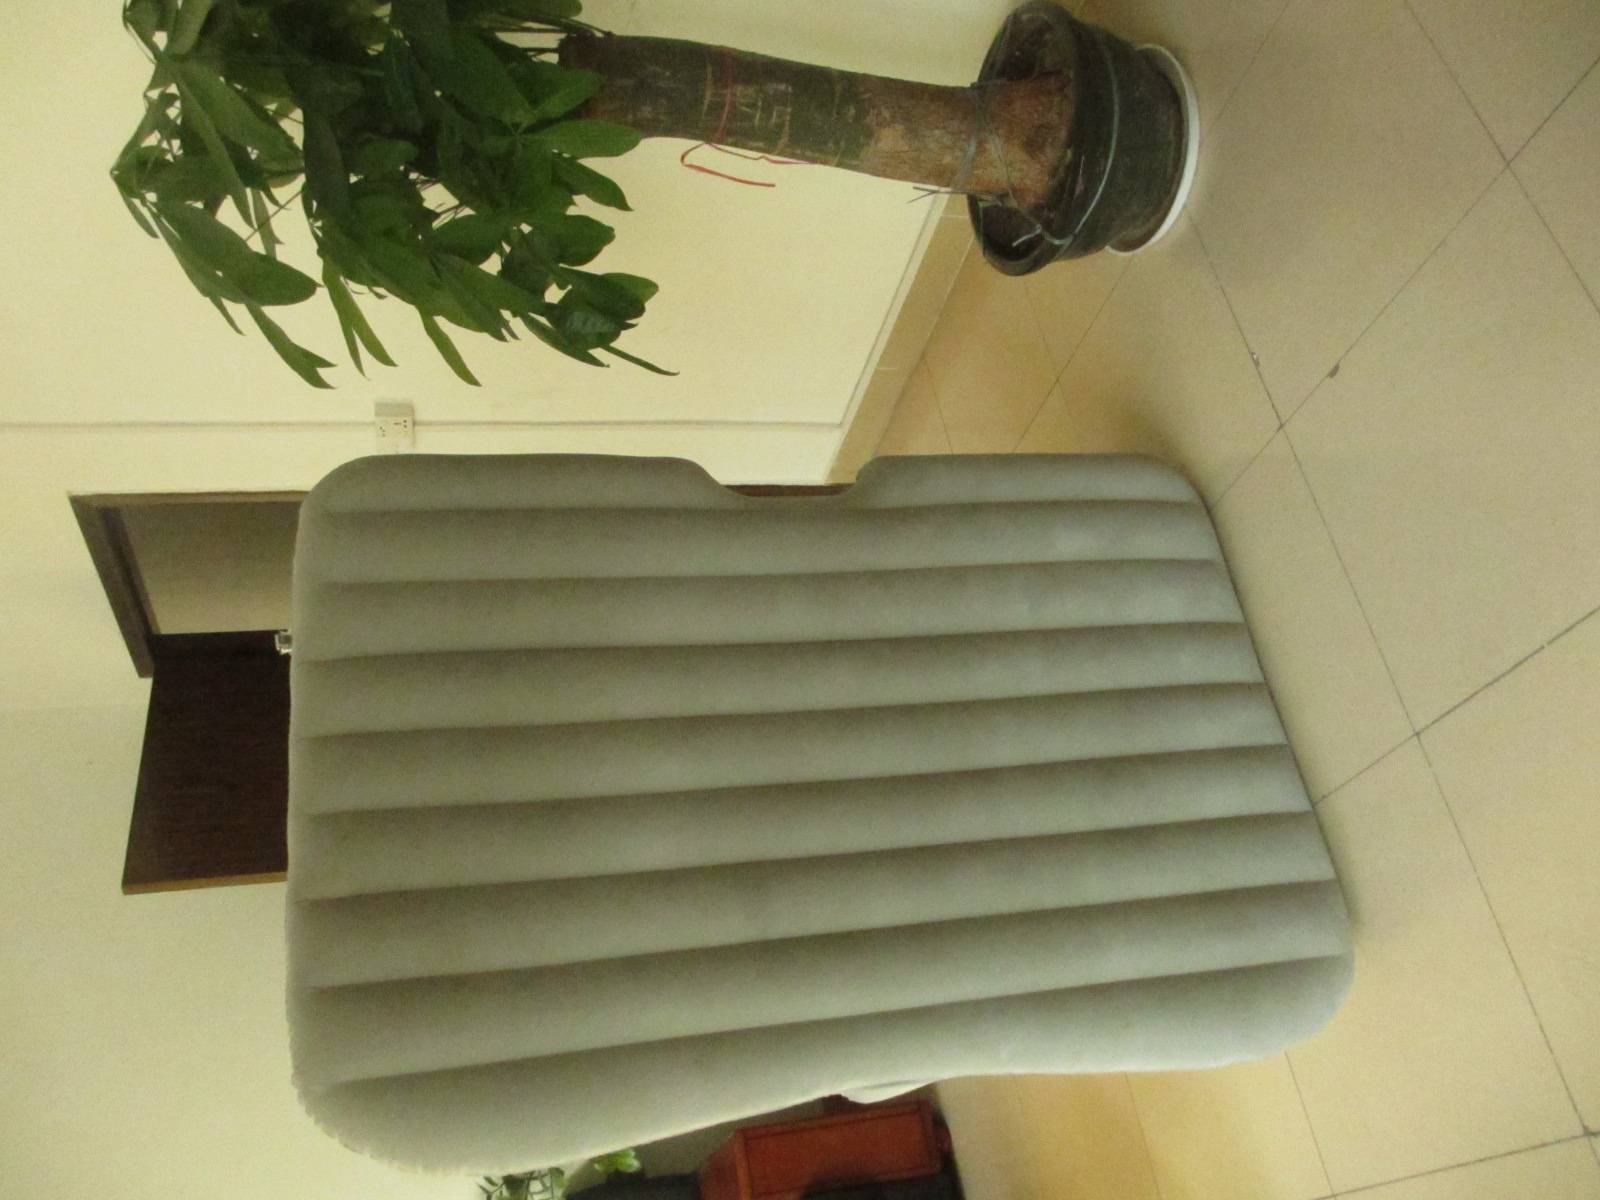 Customised 135X90X45CM Inflatable Mattress For Car Space Inside,With Flocking Obverse Side